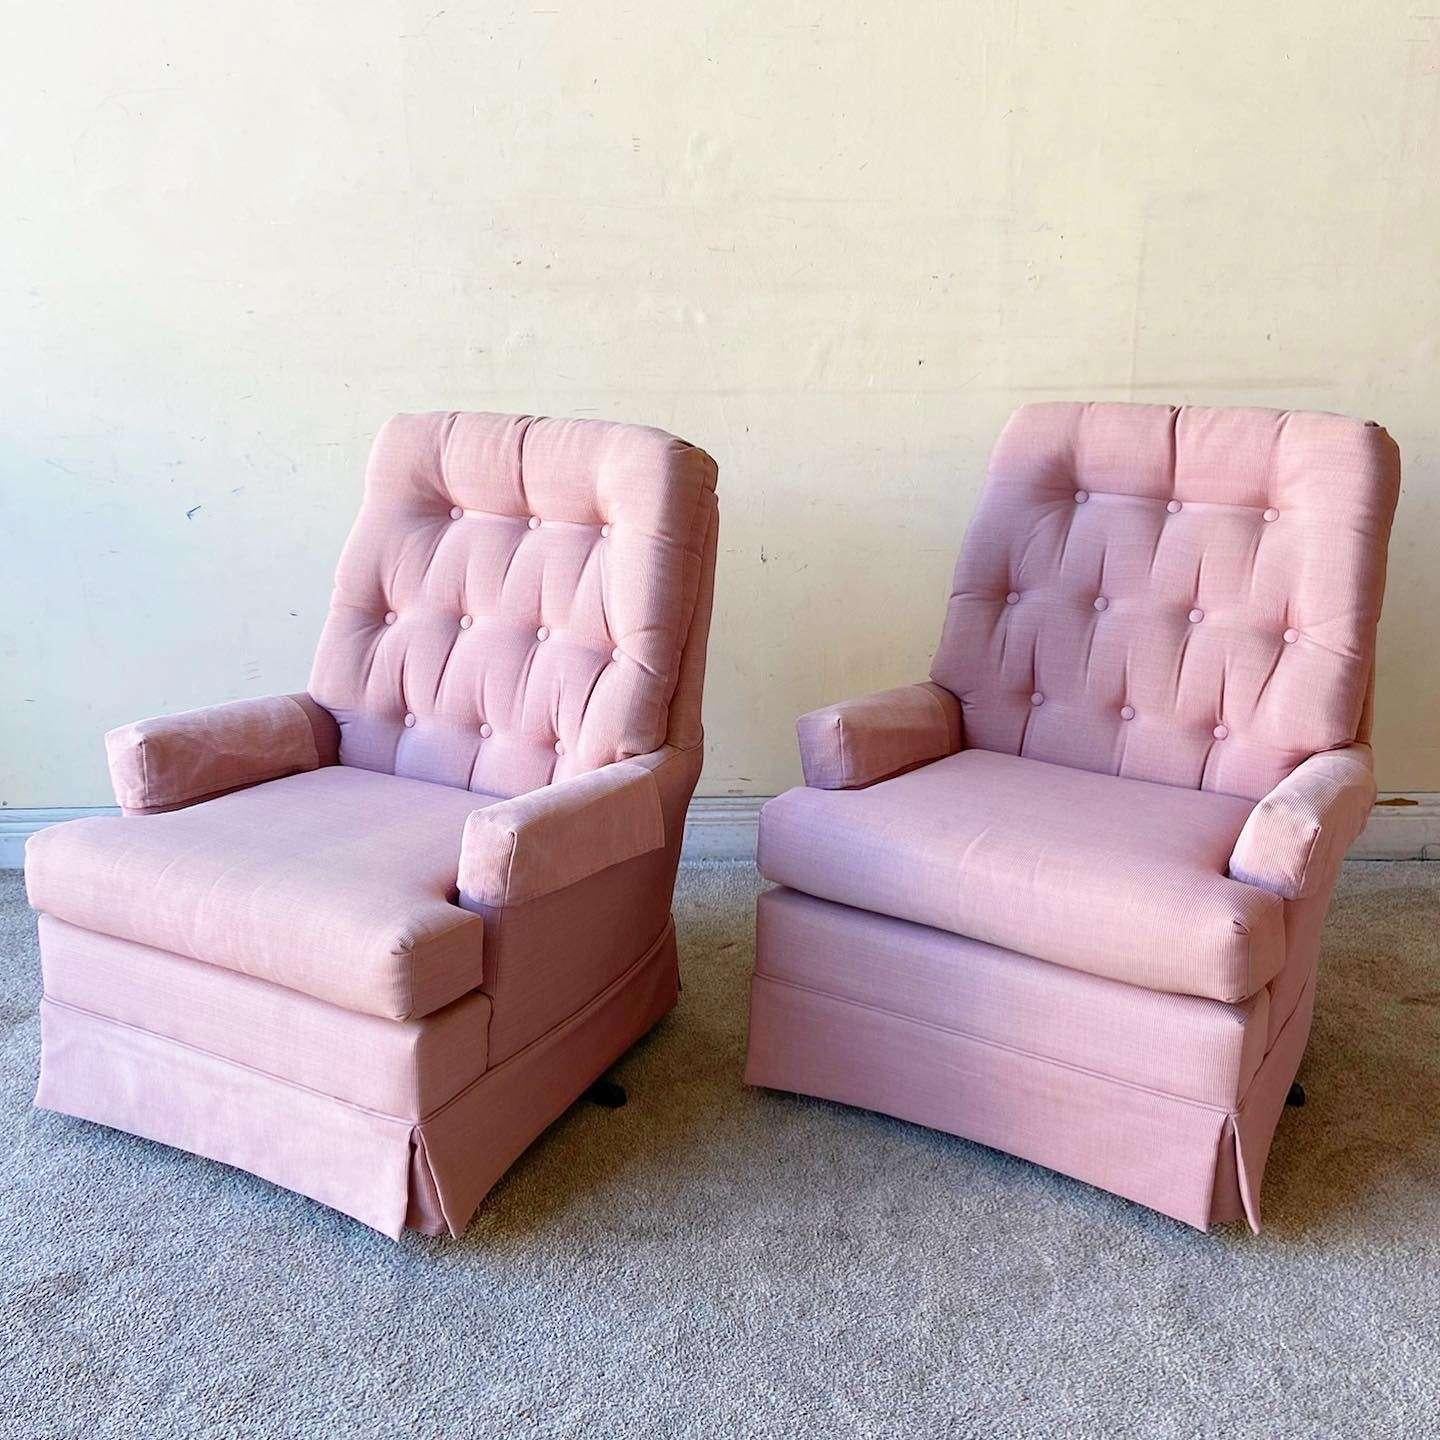 Exceptional pair of vintage mid century modern swivel lounge chairs. Each feature a pink fabric with a tufted back rest.

Seat height is 17.0 in